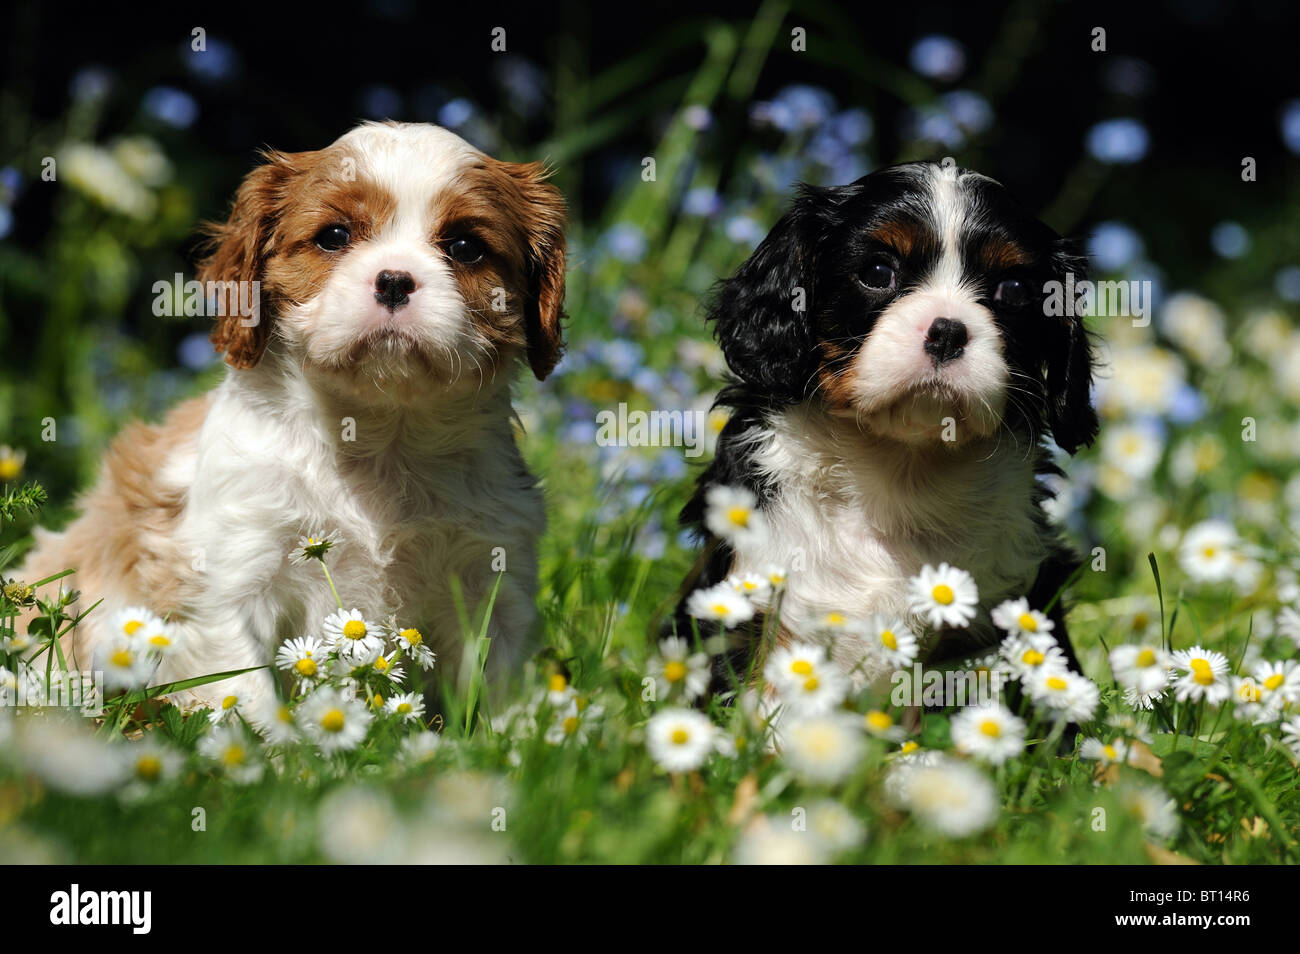 Cavalier King Charles Spaniel (Canis lupus familiaris). Two puppies sitting in a flowering meadow. Stock Photo